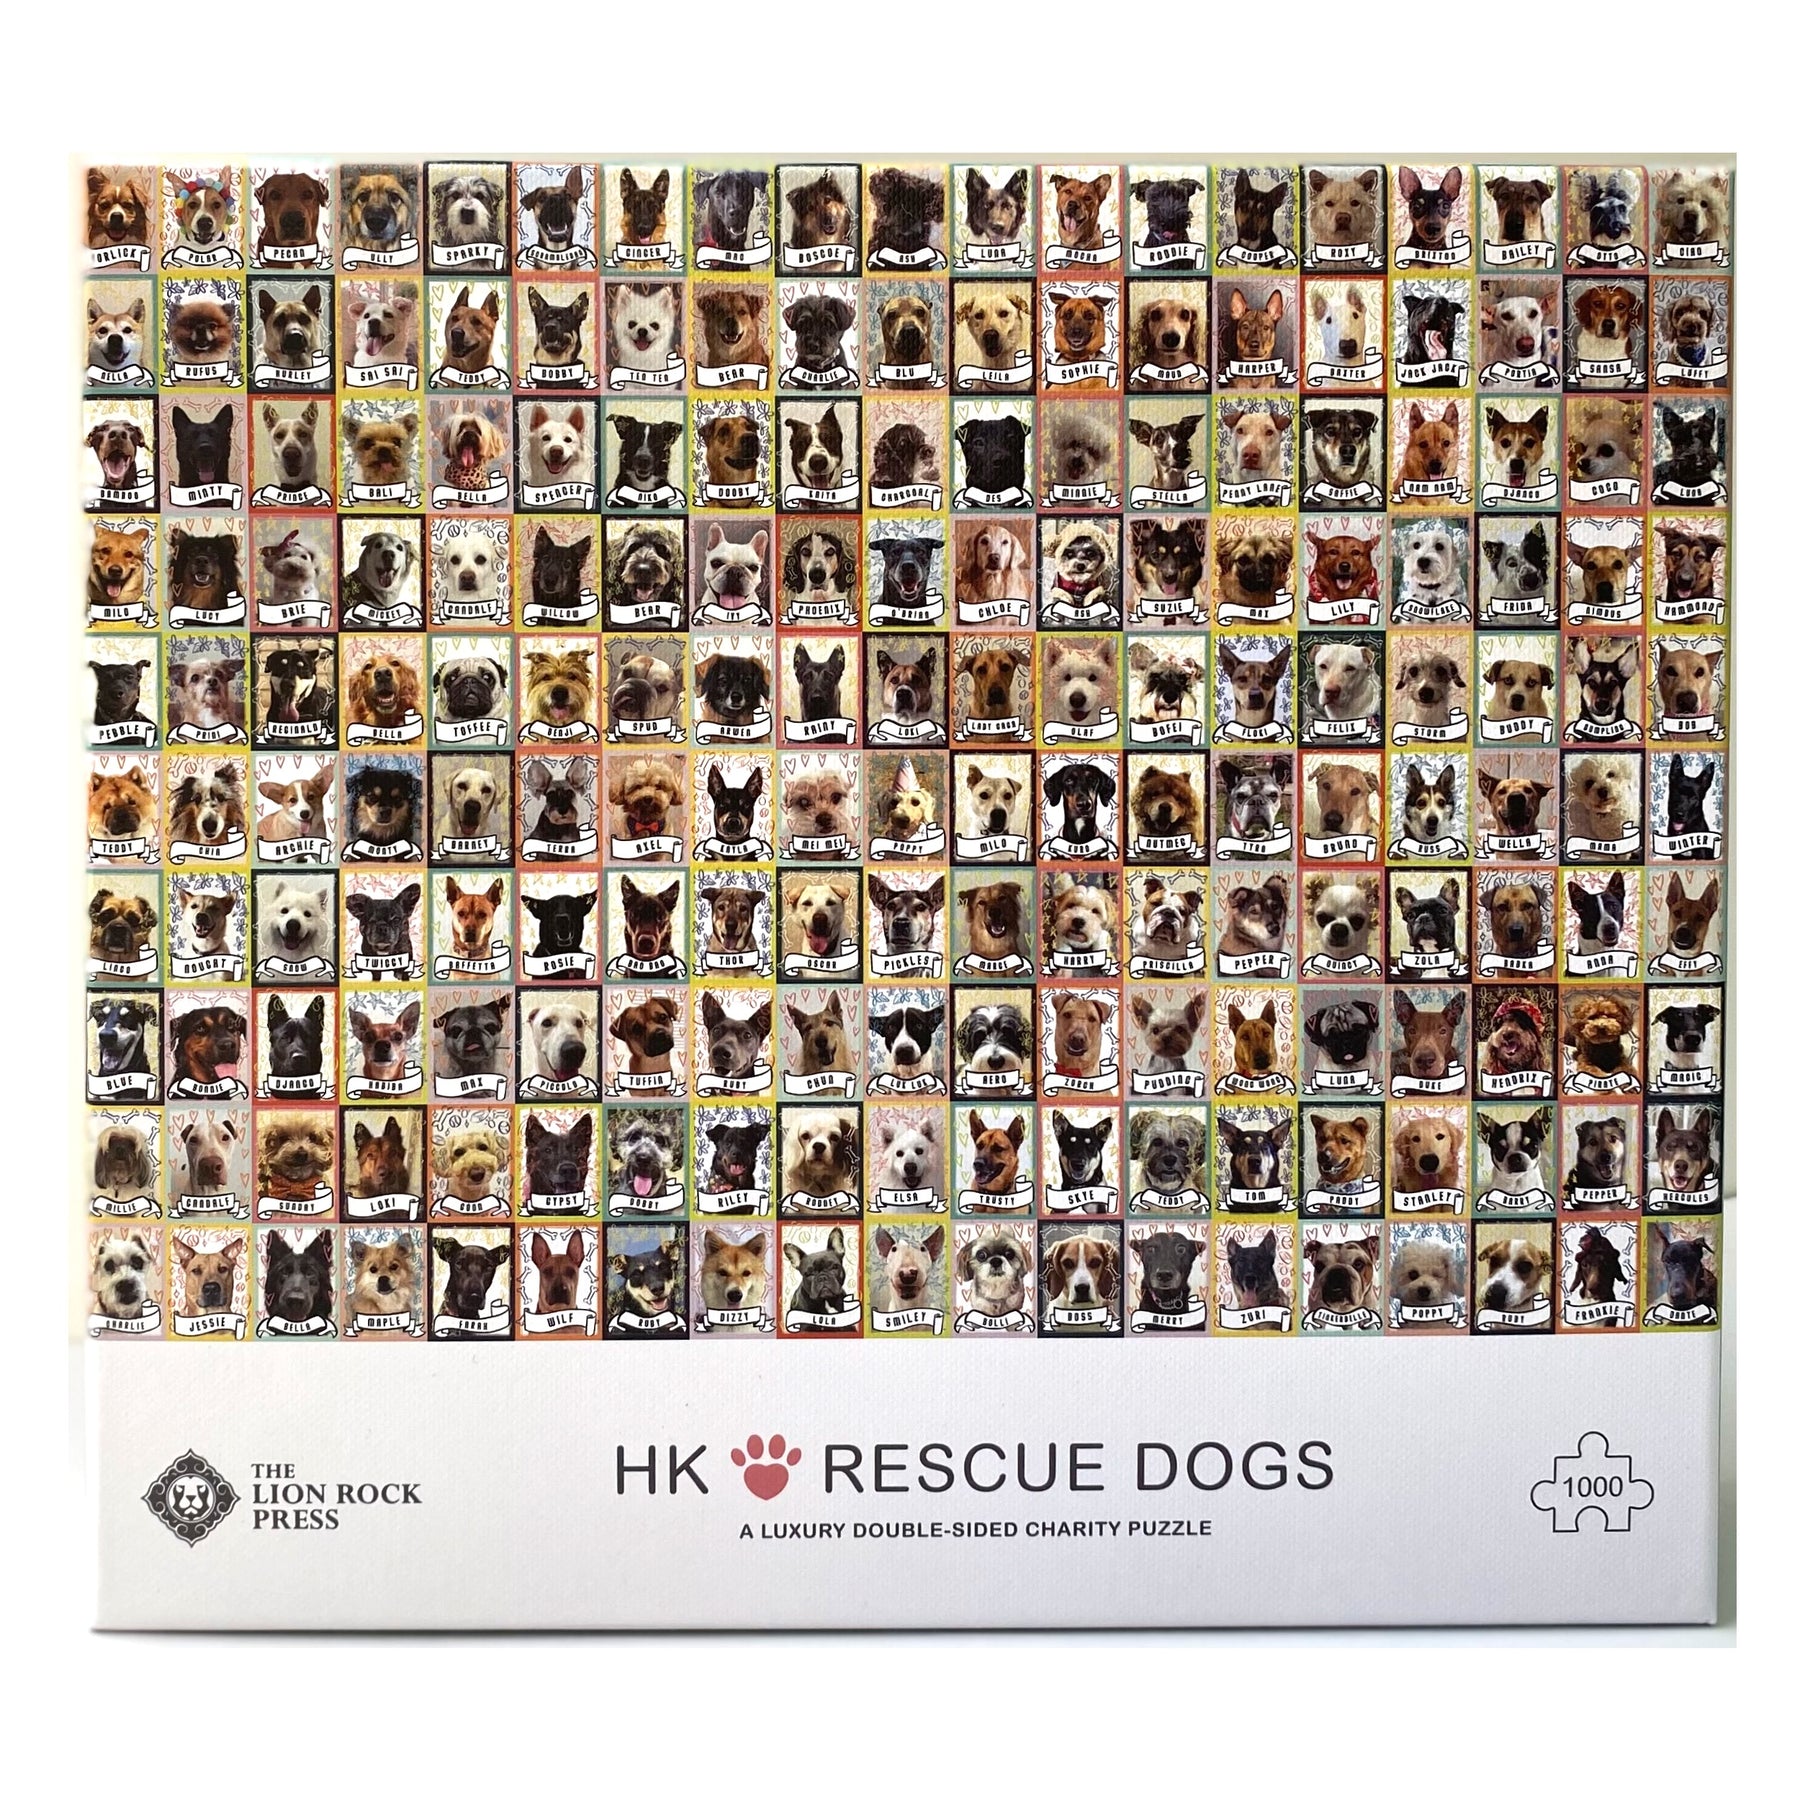 Light Gray LUXURY DOUBLE-SIDED 1000pc PUZZLE: HK Loves Rescue Dogs